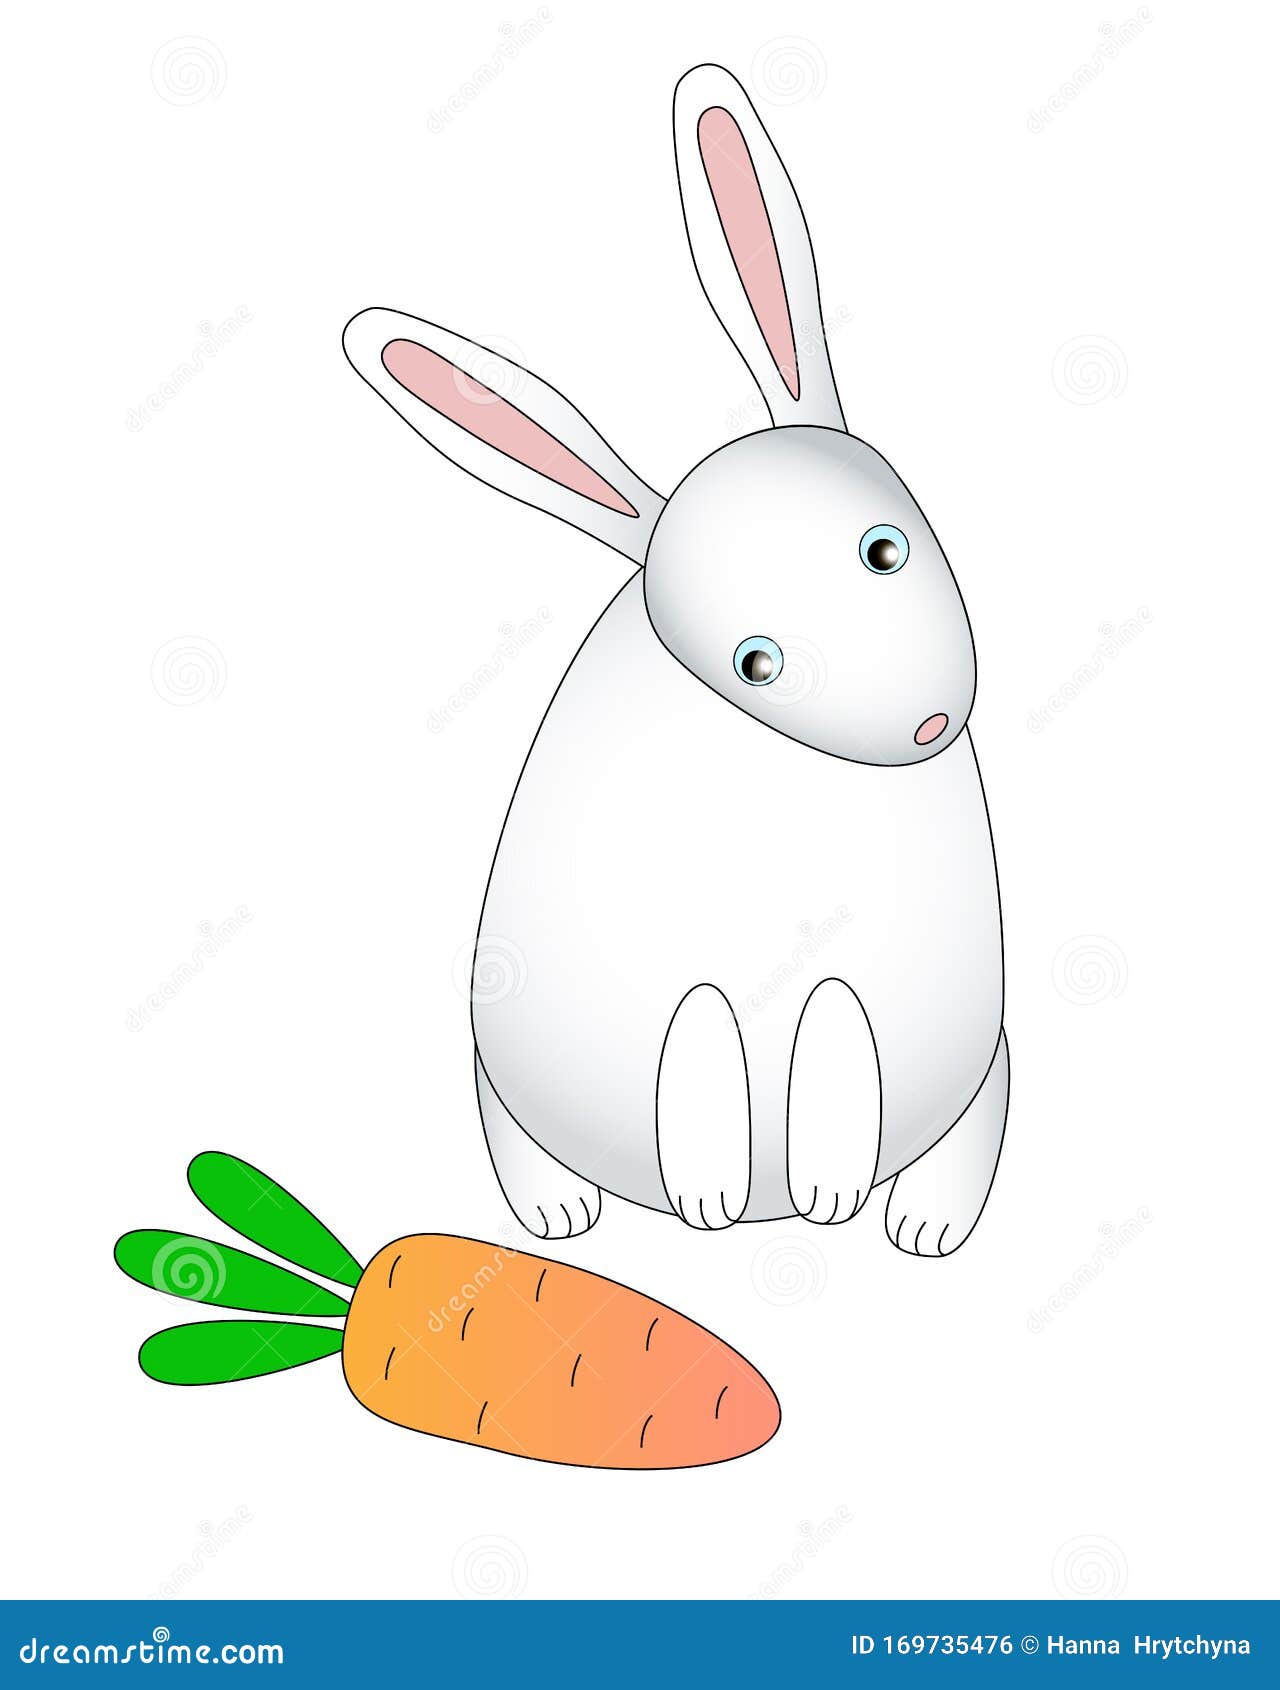 White Rabbit with Pink Ears Looks at a Carrot. Long-eared Hare Wants To Eat  Carrots - Cute Children Vector Illustration Stock Vector - Illustration of  drawing, found: 169735476